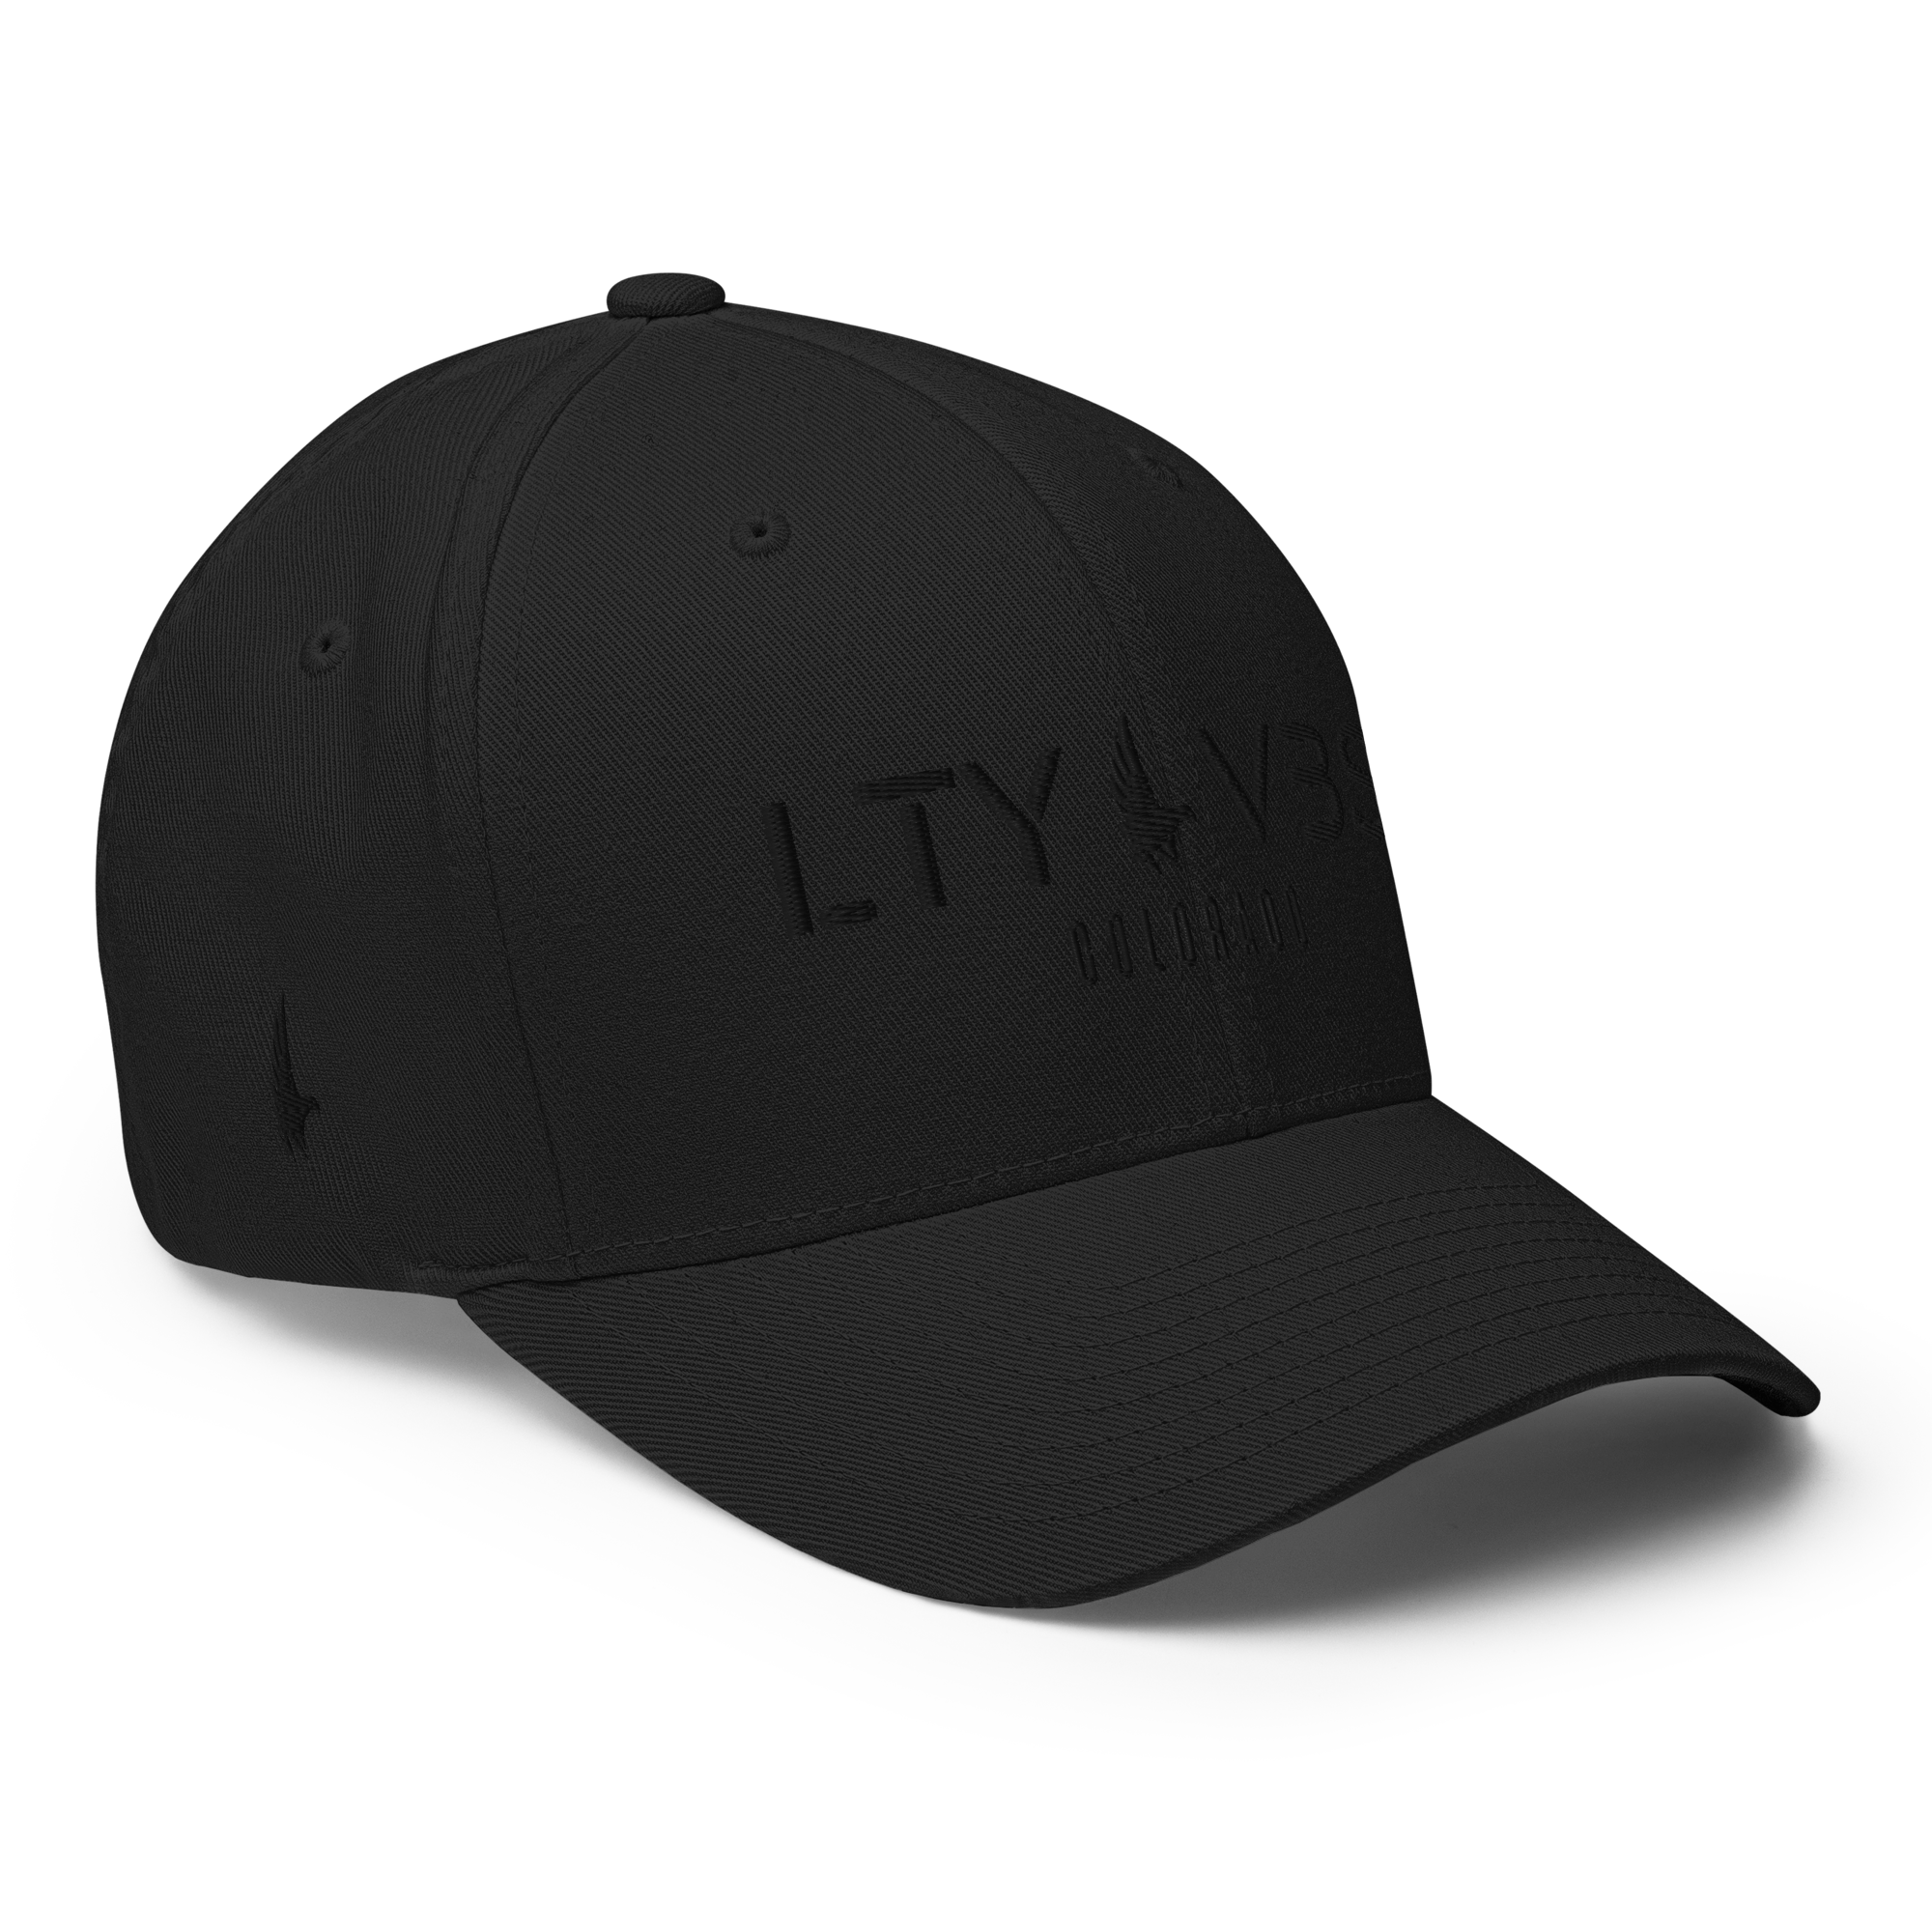 Loyalty Era Colorado Fitted Hat Black / Black Fitted - Loyalty Vibes